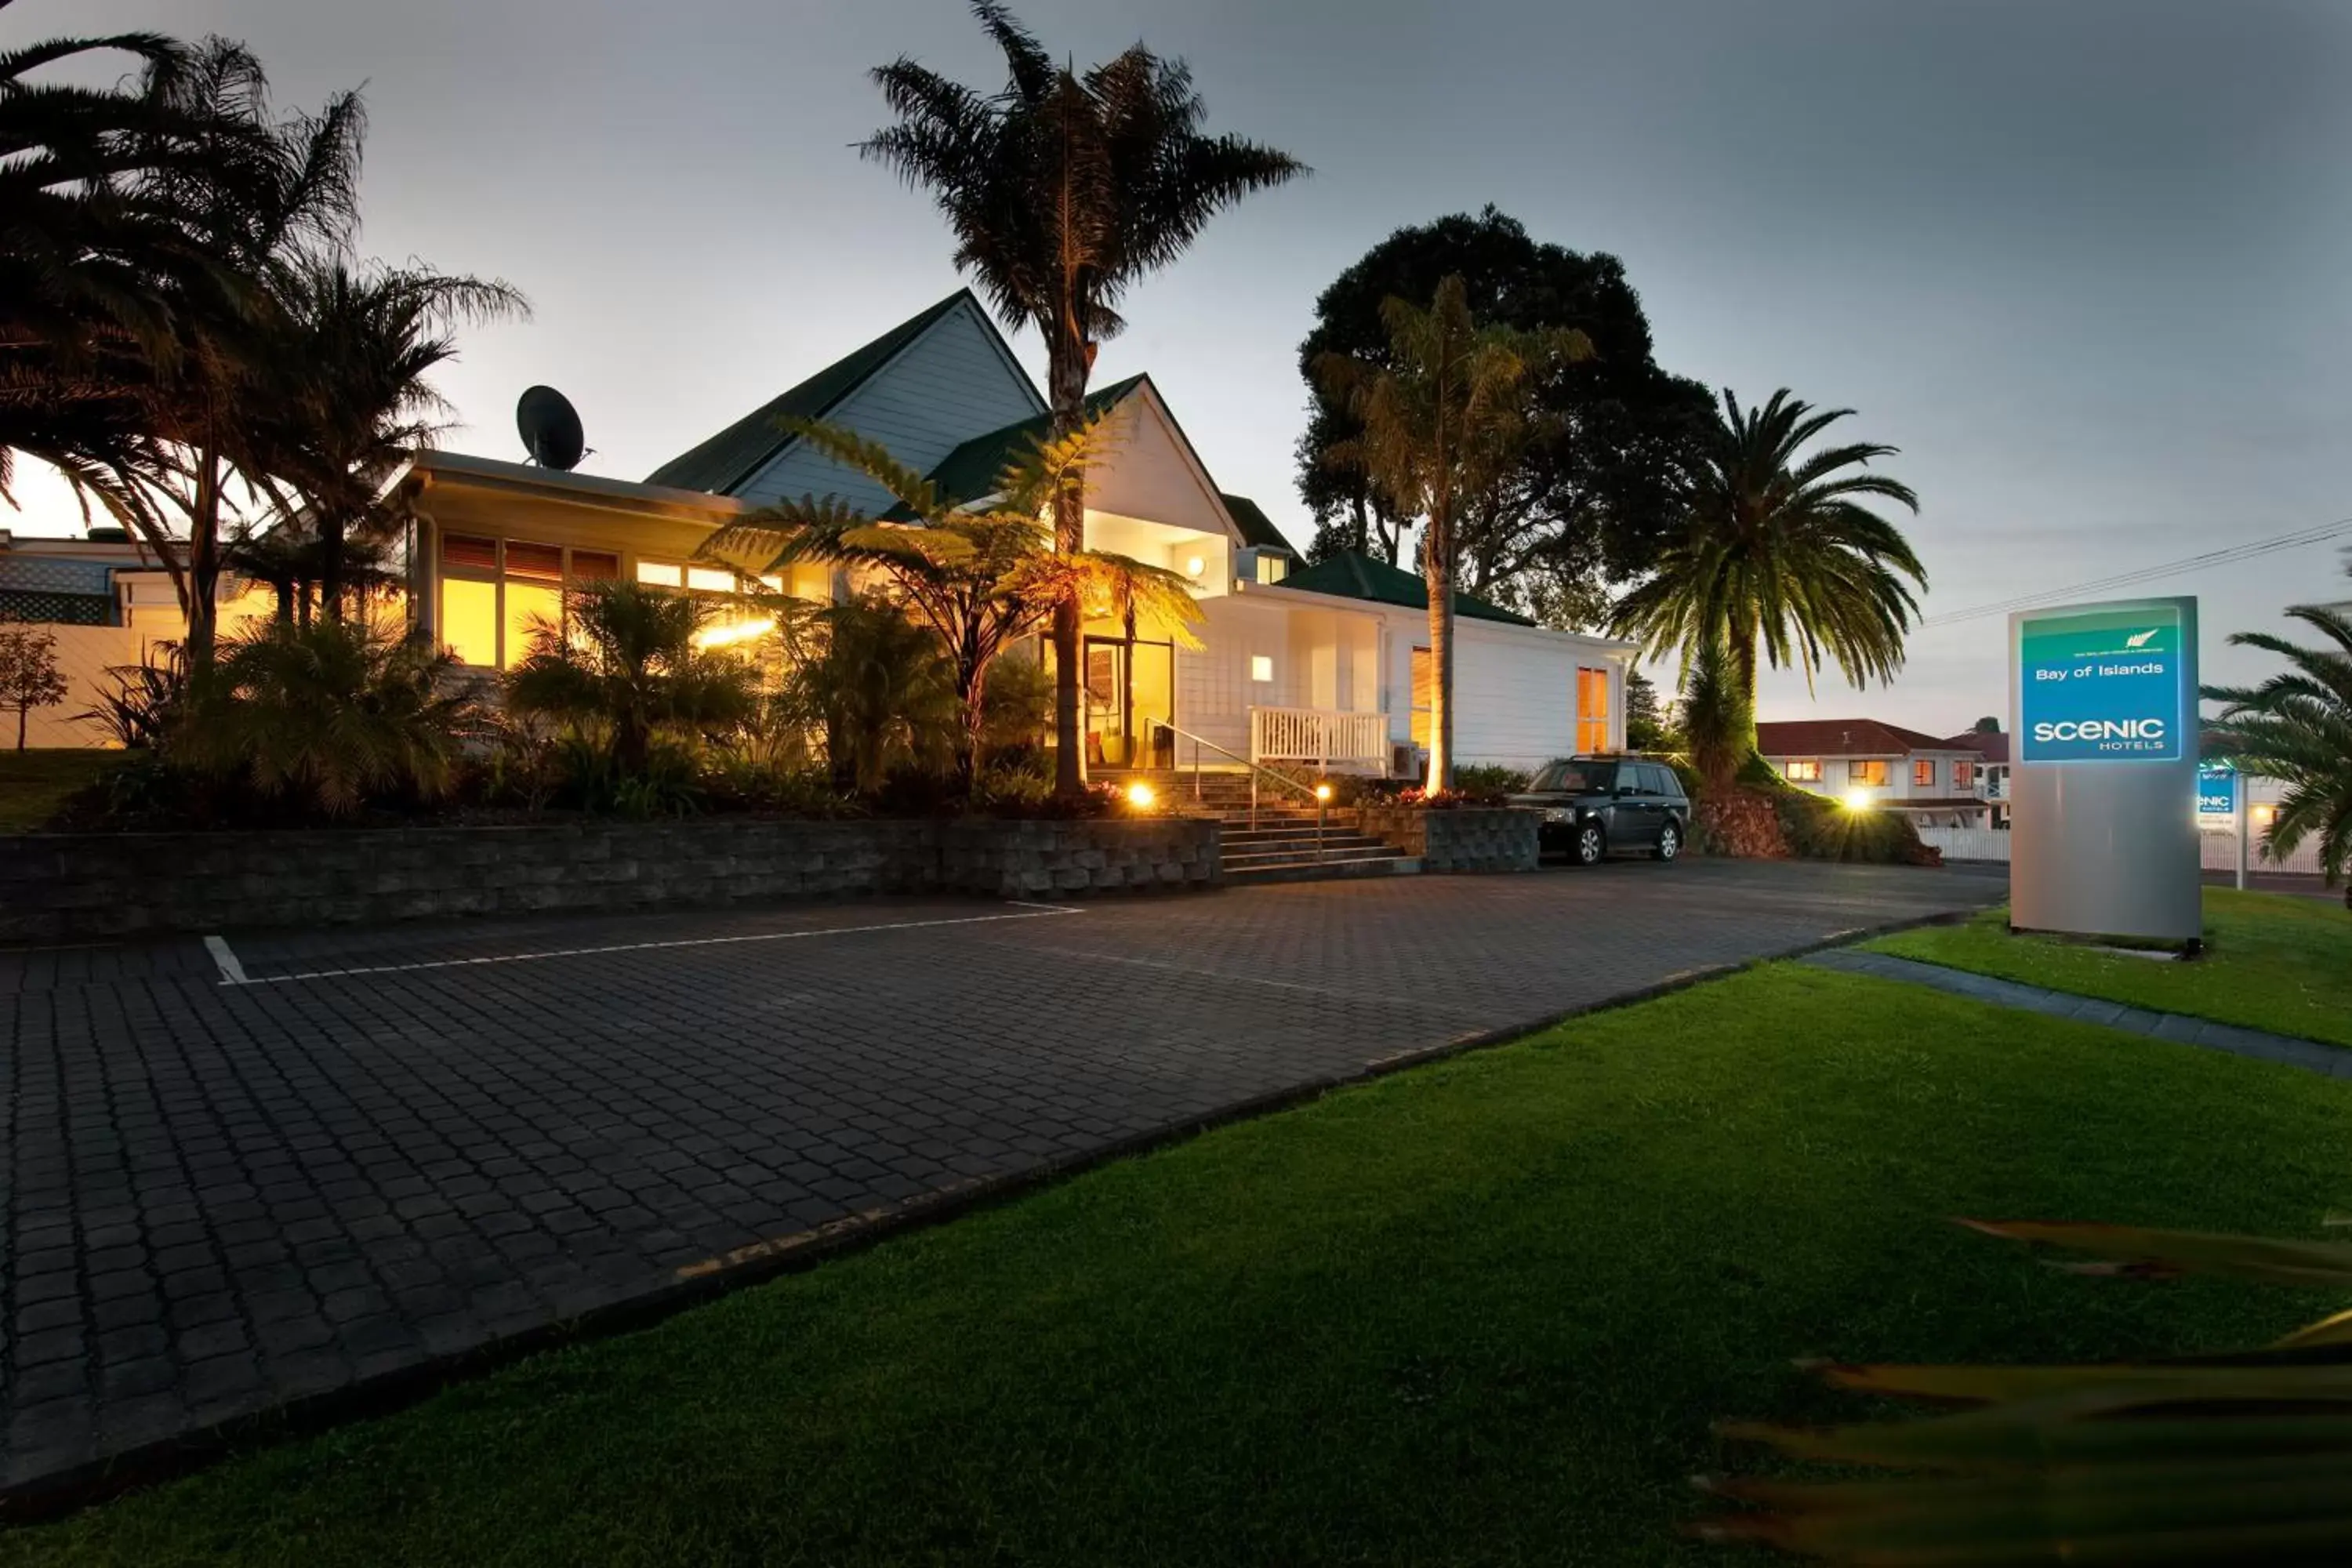 Property Building in Scenic Hotel Bay of Islands